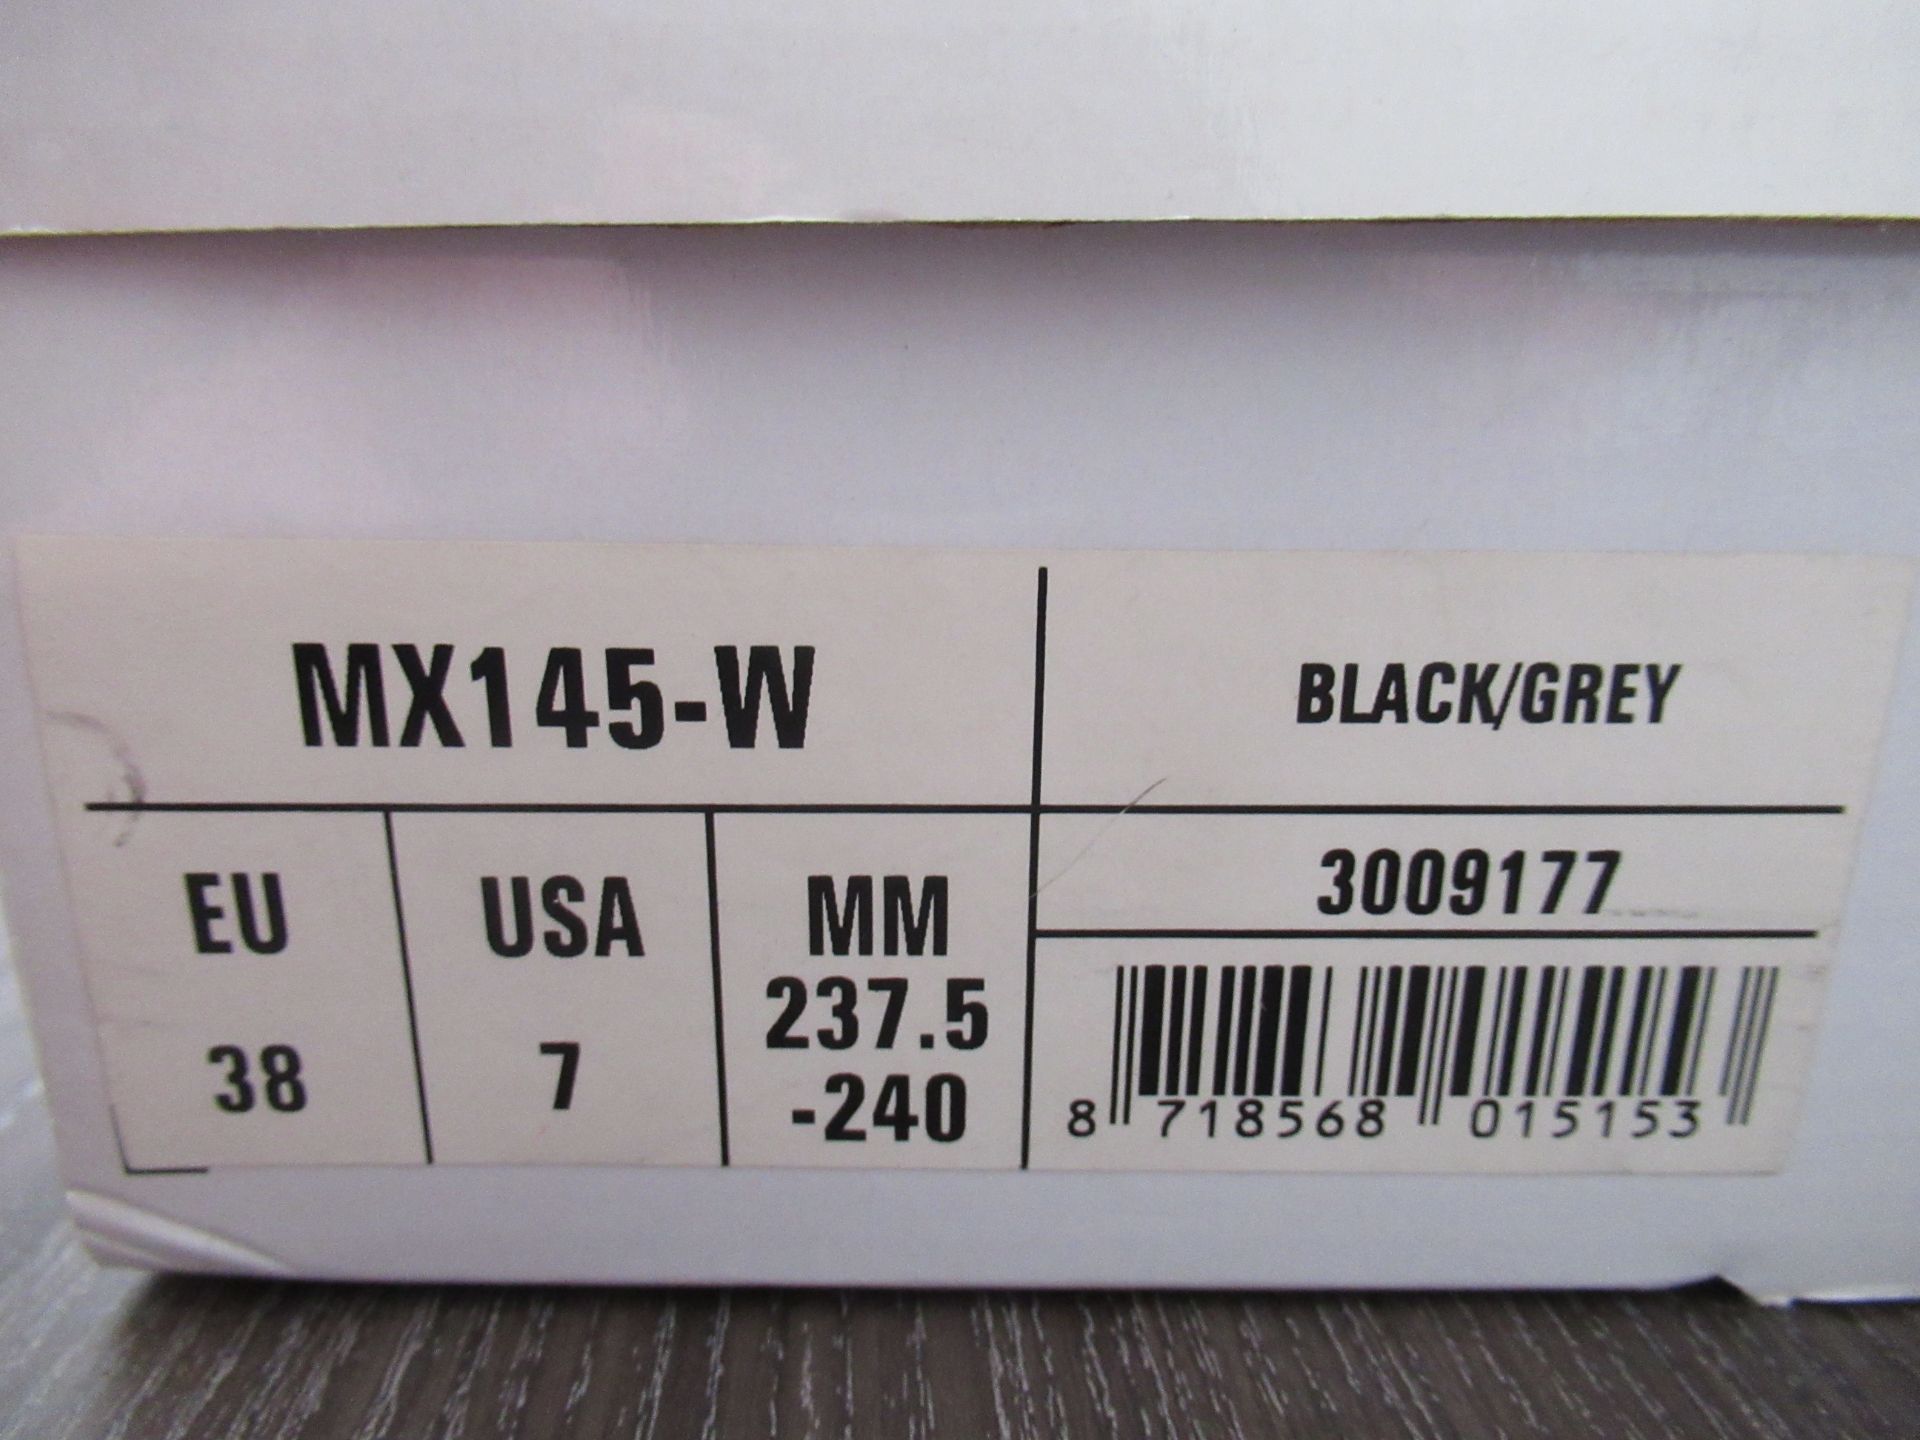 Pair of Lake MX145-W cycling boots (black/grey) - boxed EU size 38 (RRP£189.99) - Image 3 of 4